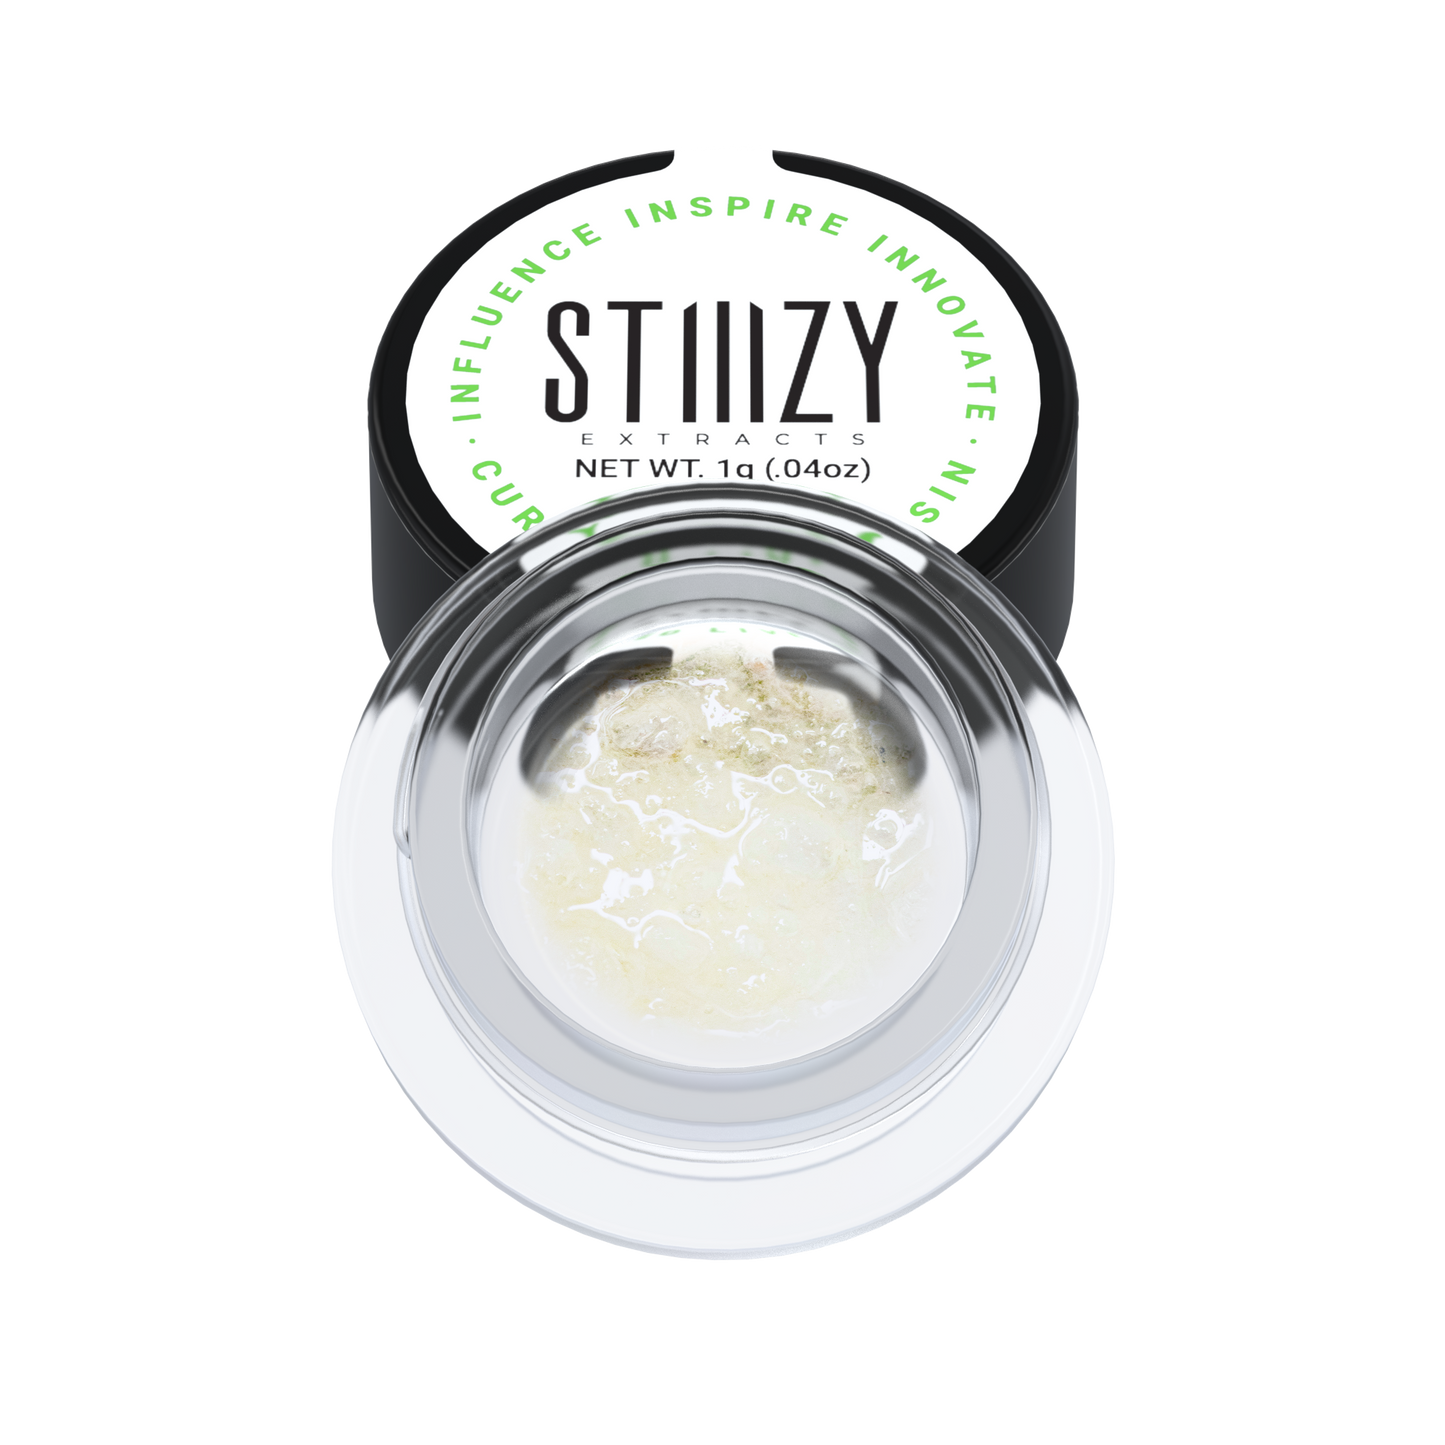 STIIIZY - Curated Live Resin - 1g